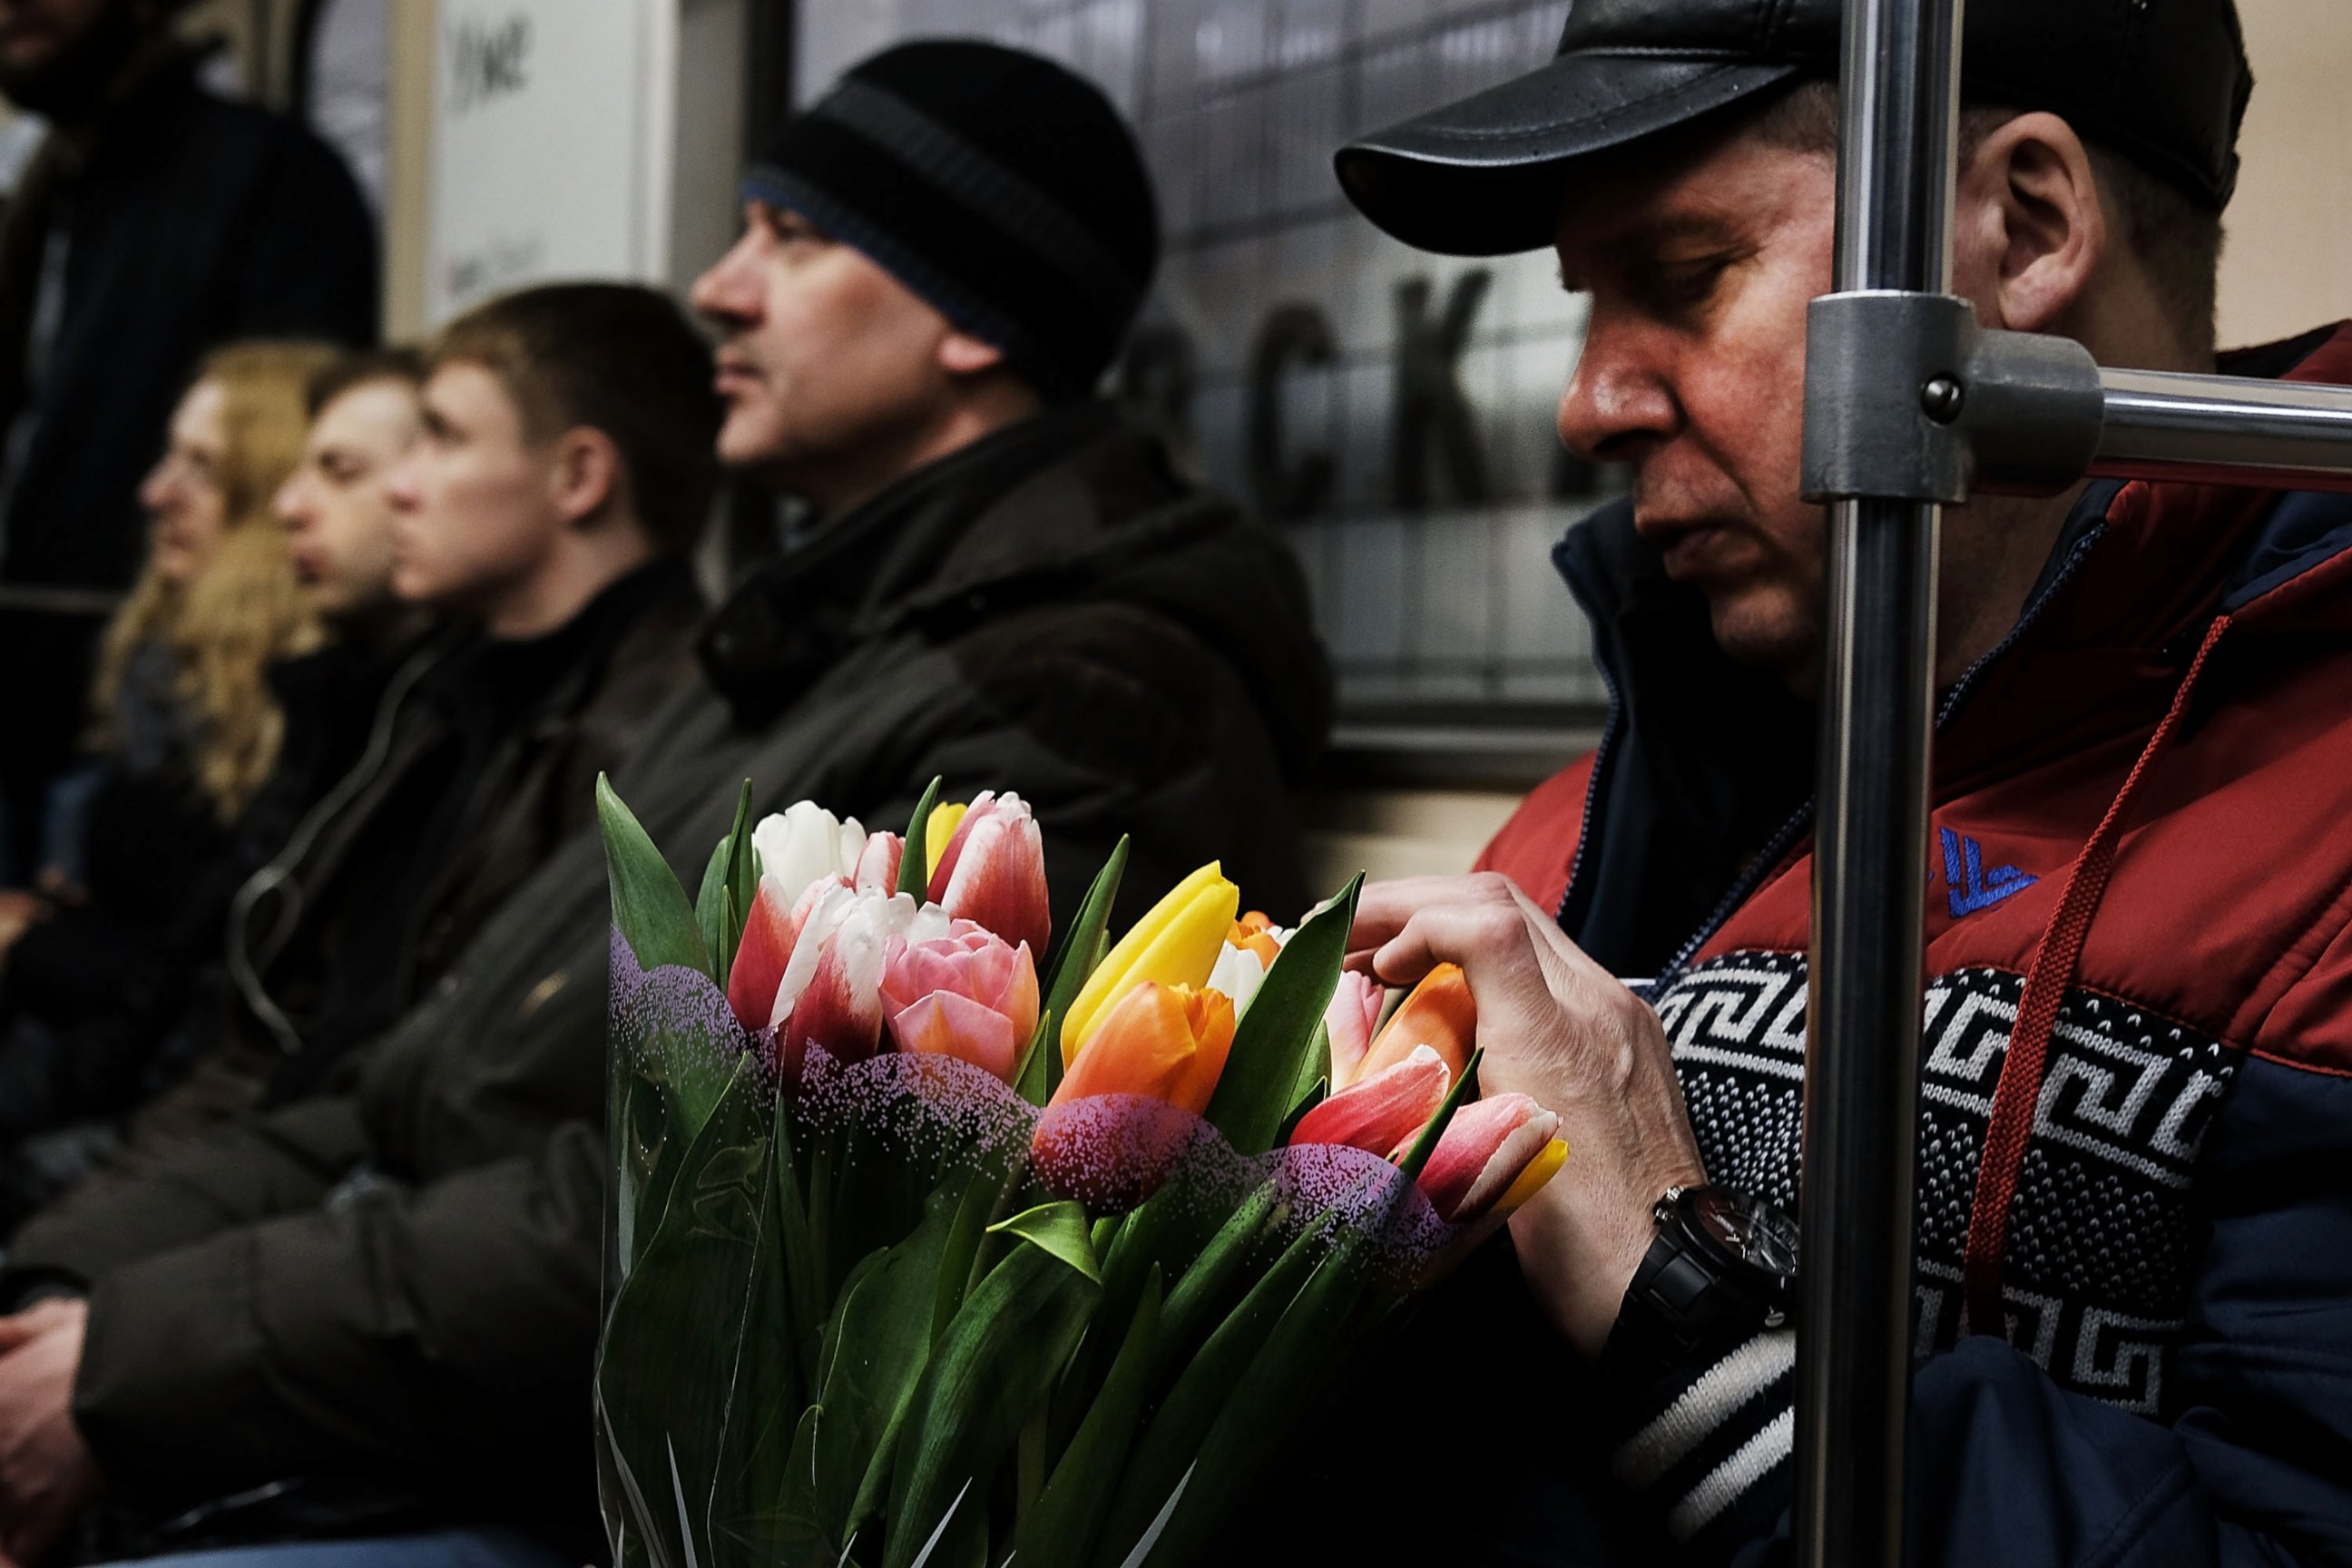 PHOTO: A man holds flowers while riding a Moscow subway on March 6, 2017.